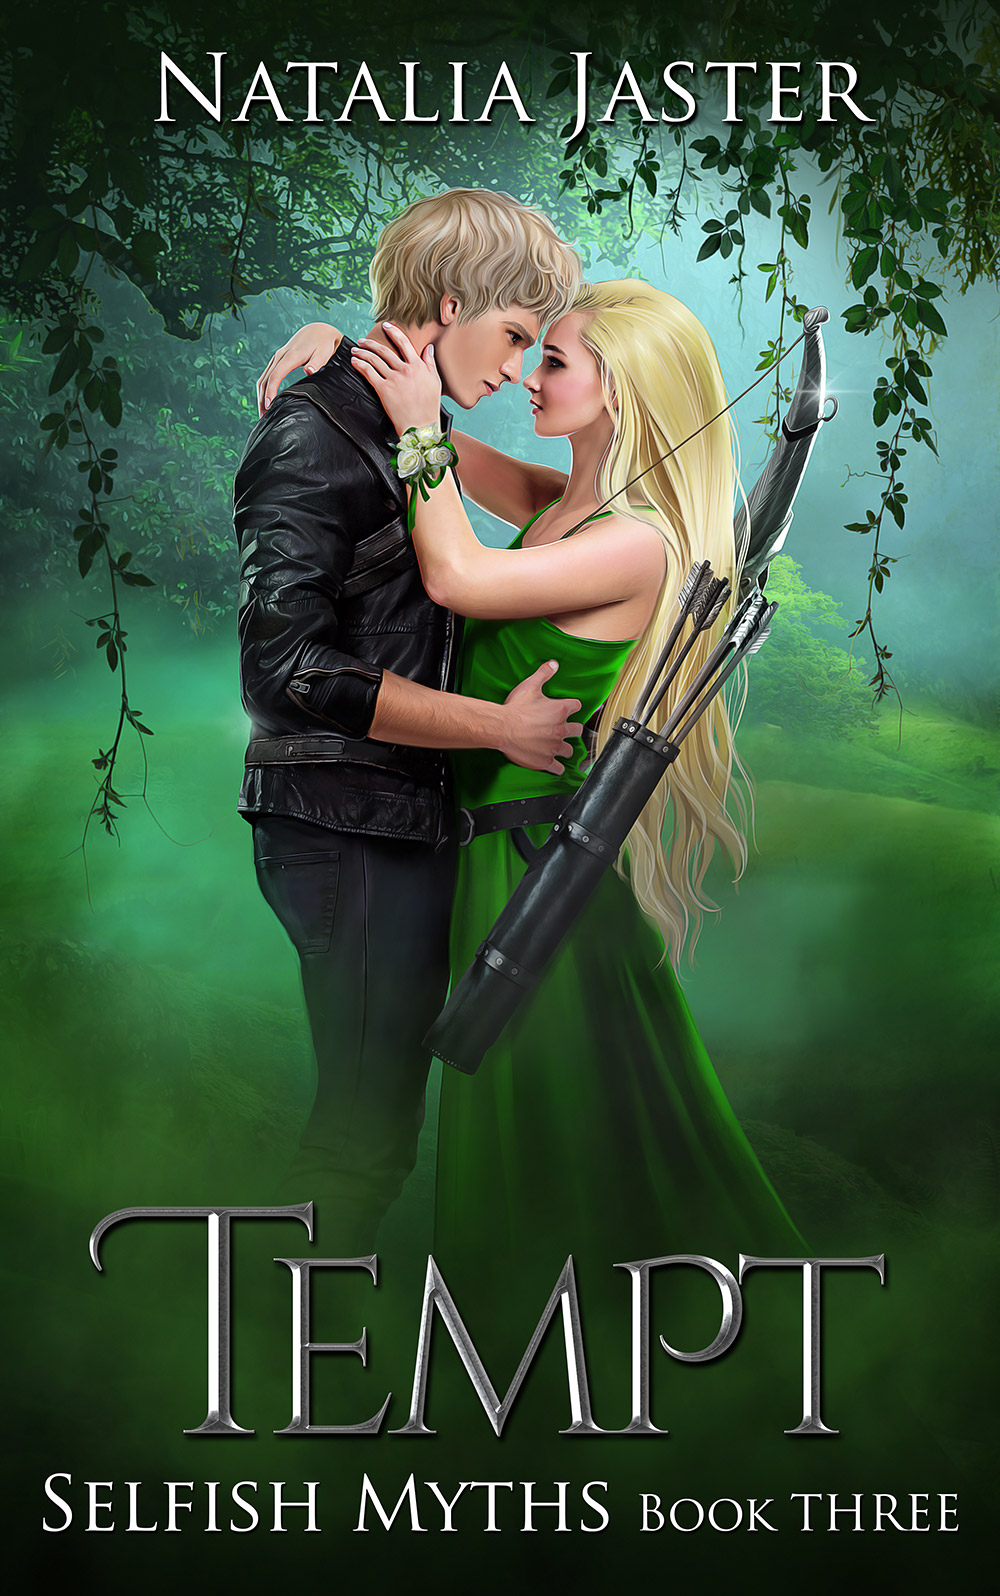 Cover for Tempt by Natalia Jaster